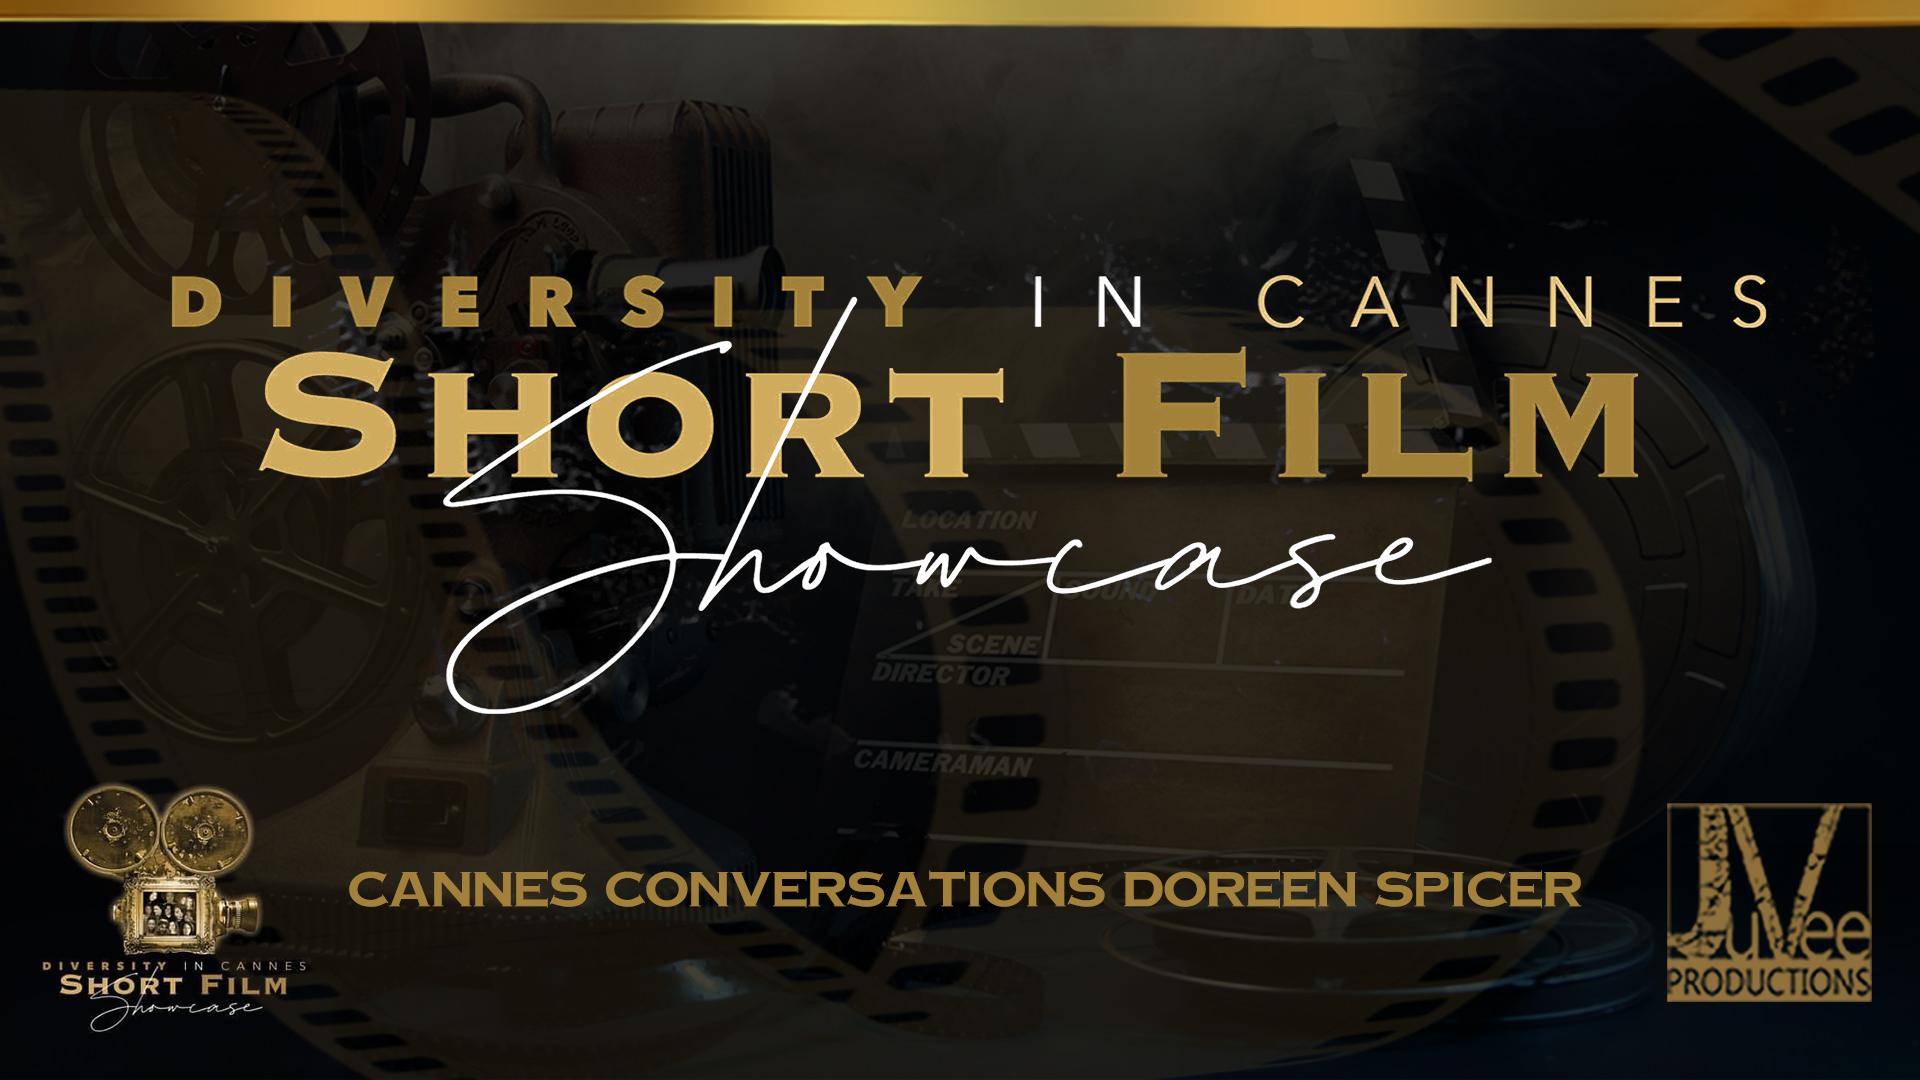 CANNES CONVERSATIONS DOREEN SPICER-DANNELLY 